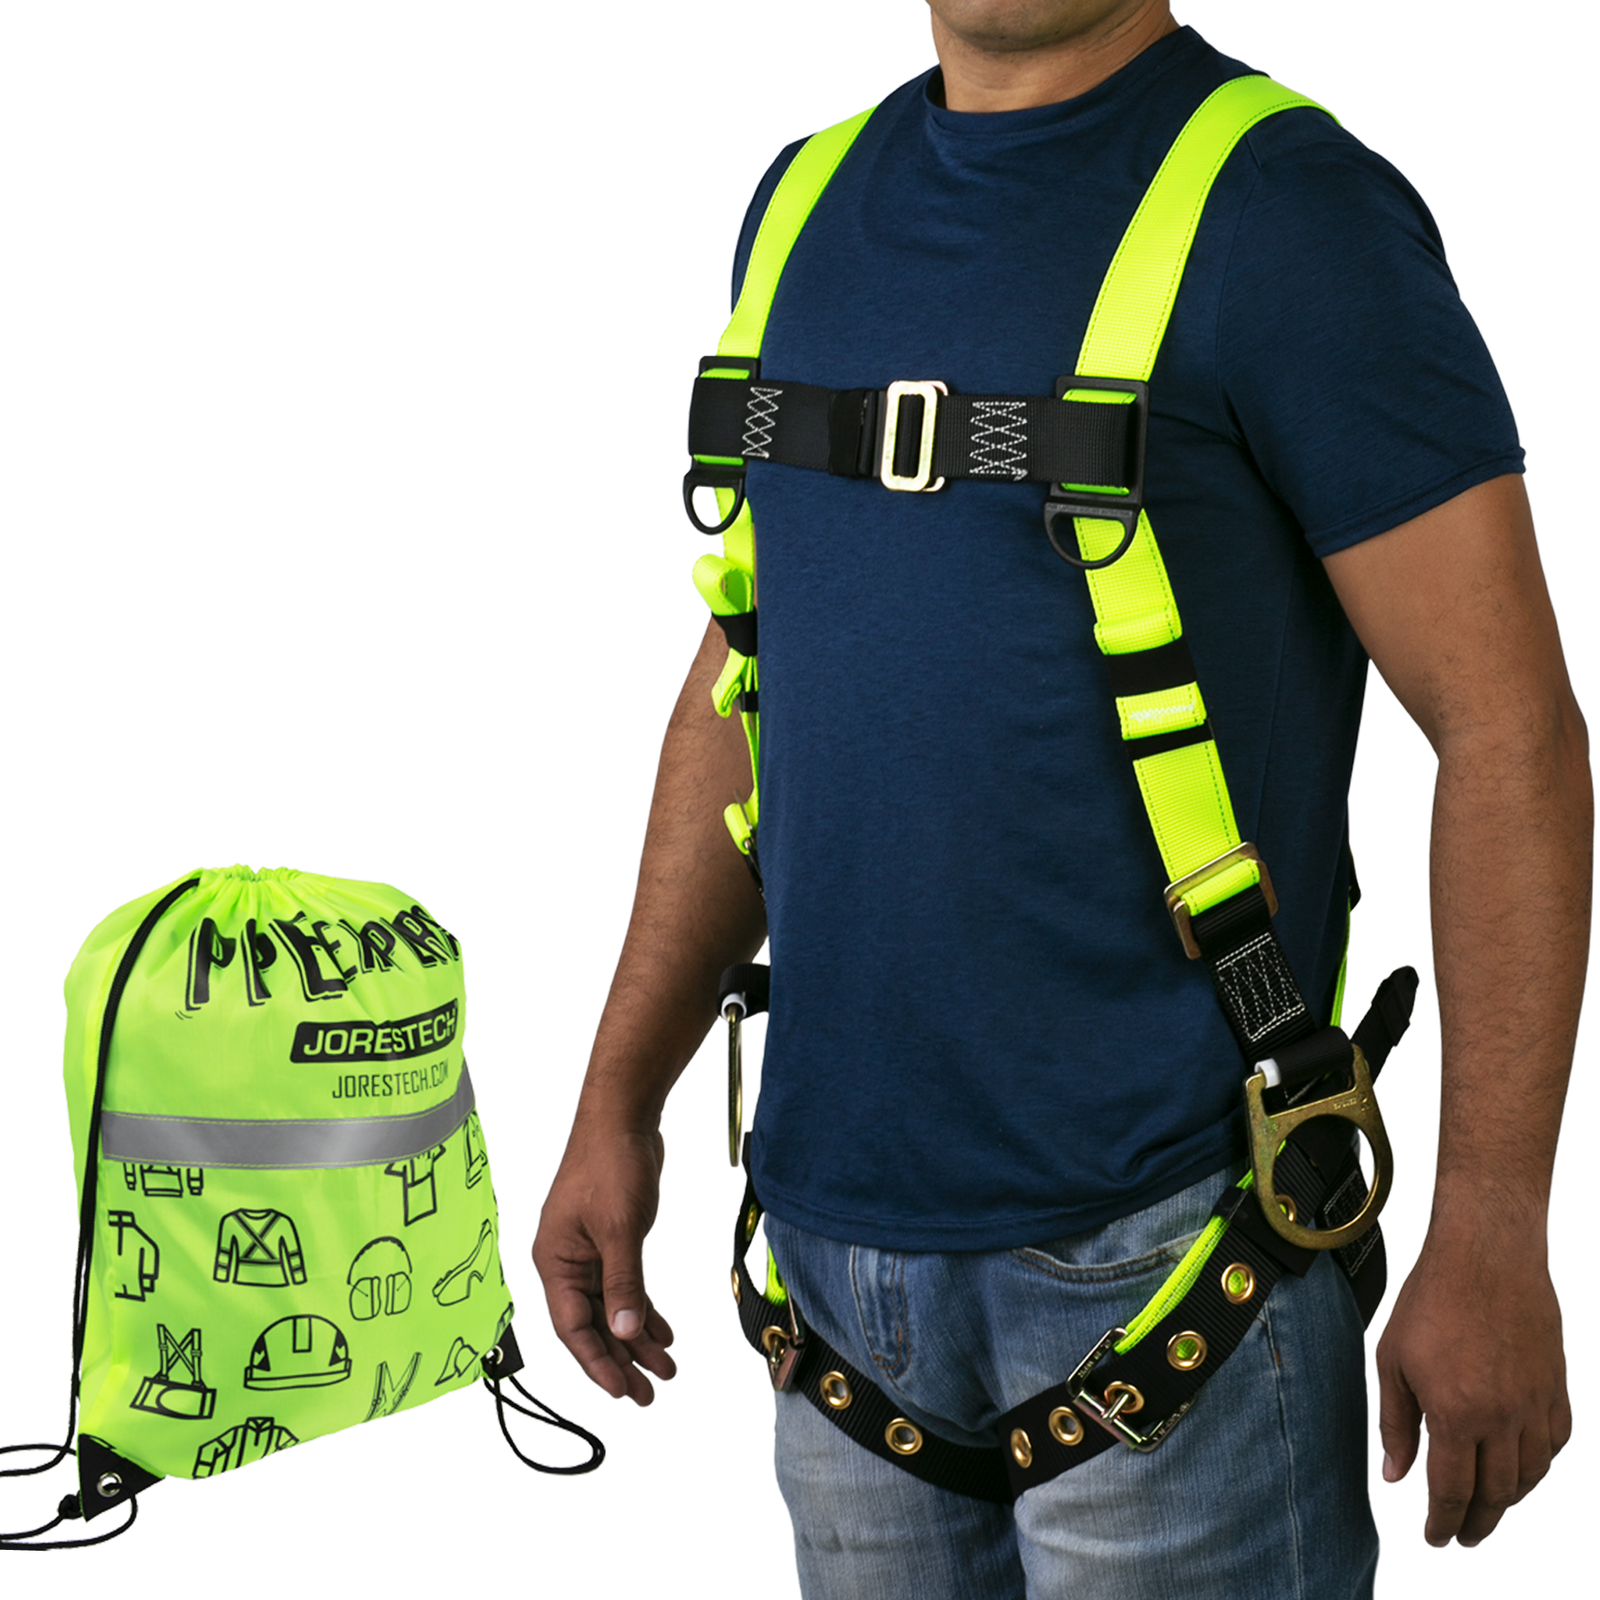 The full-body fall protection harness.